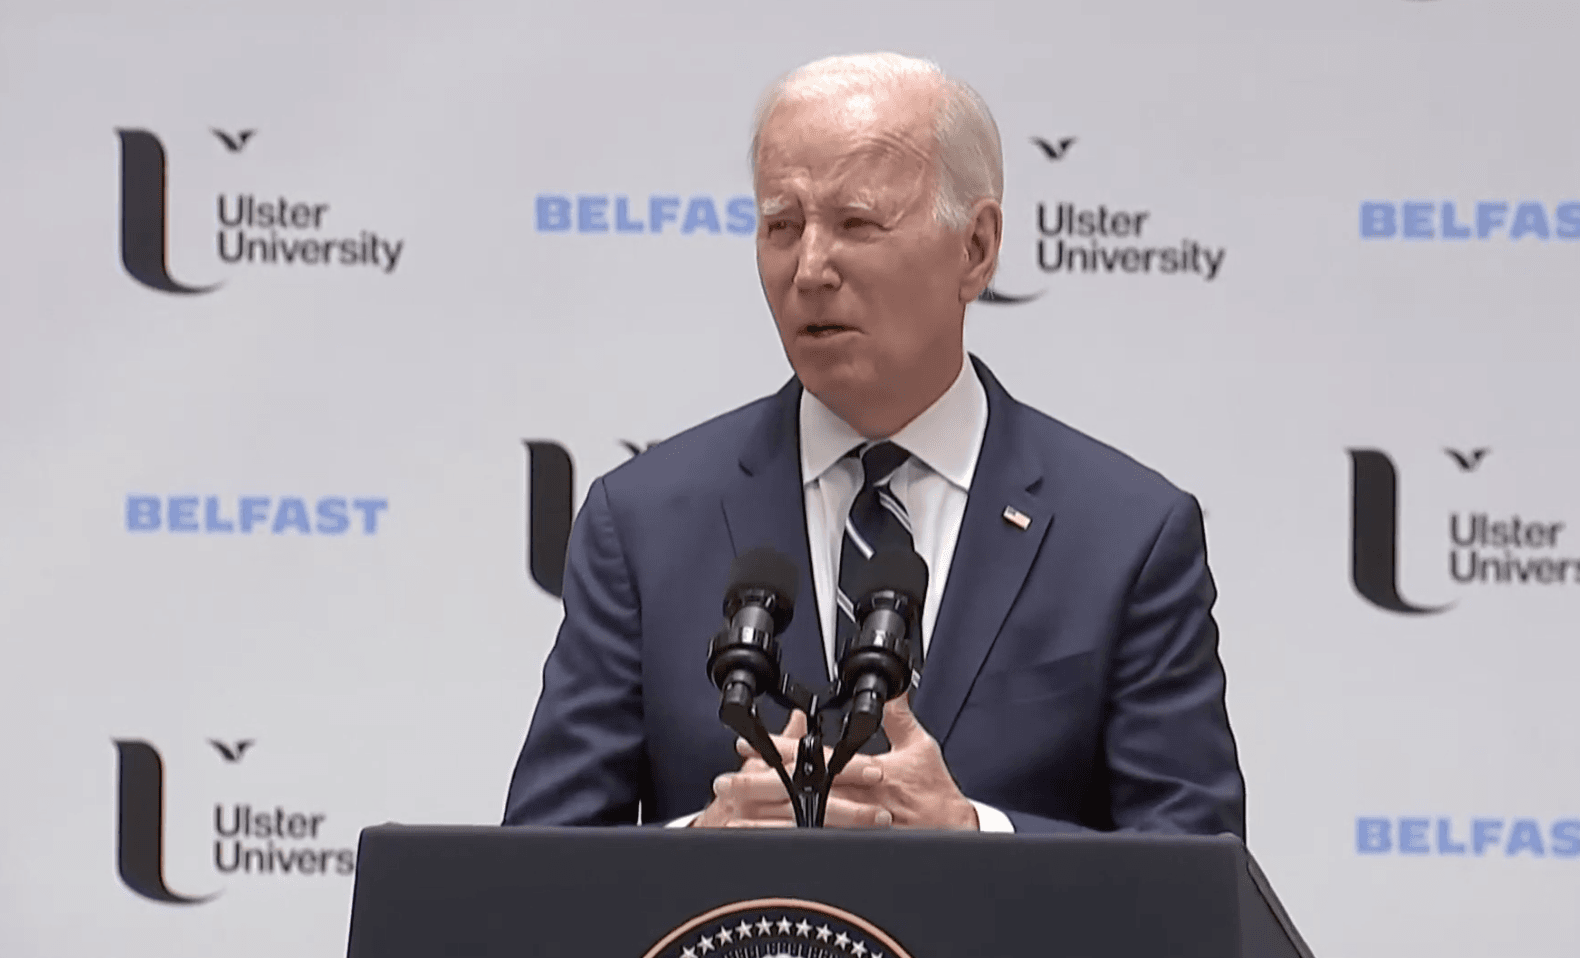 ALL CARROT, NO STICK: Joe Biden\'s speech at Ulster University was pitched directly at a unionist audience